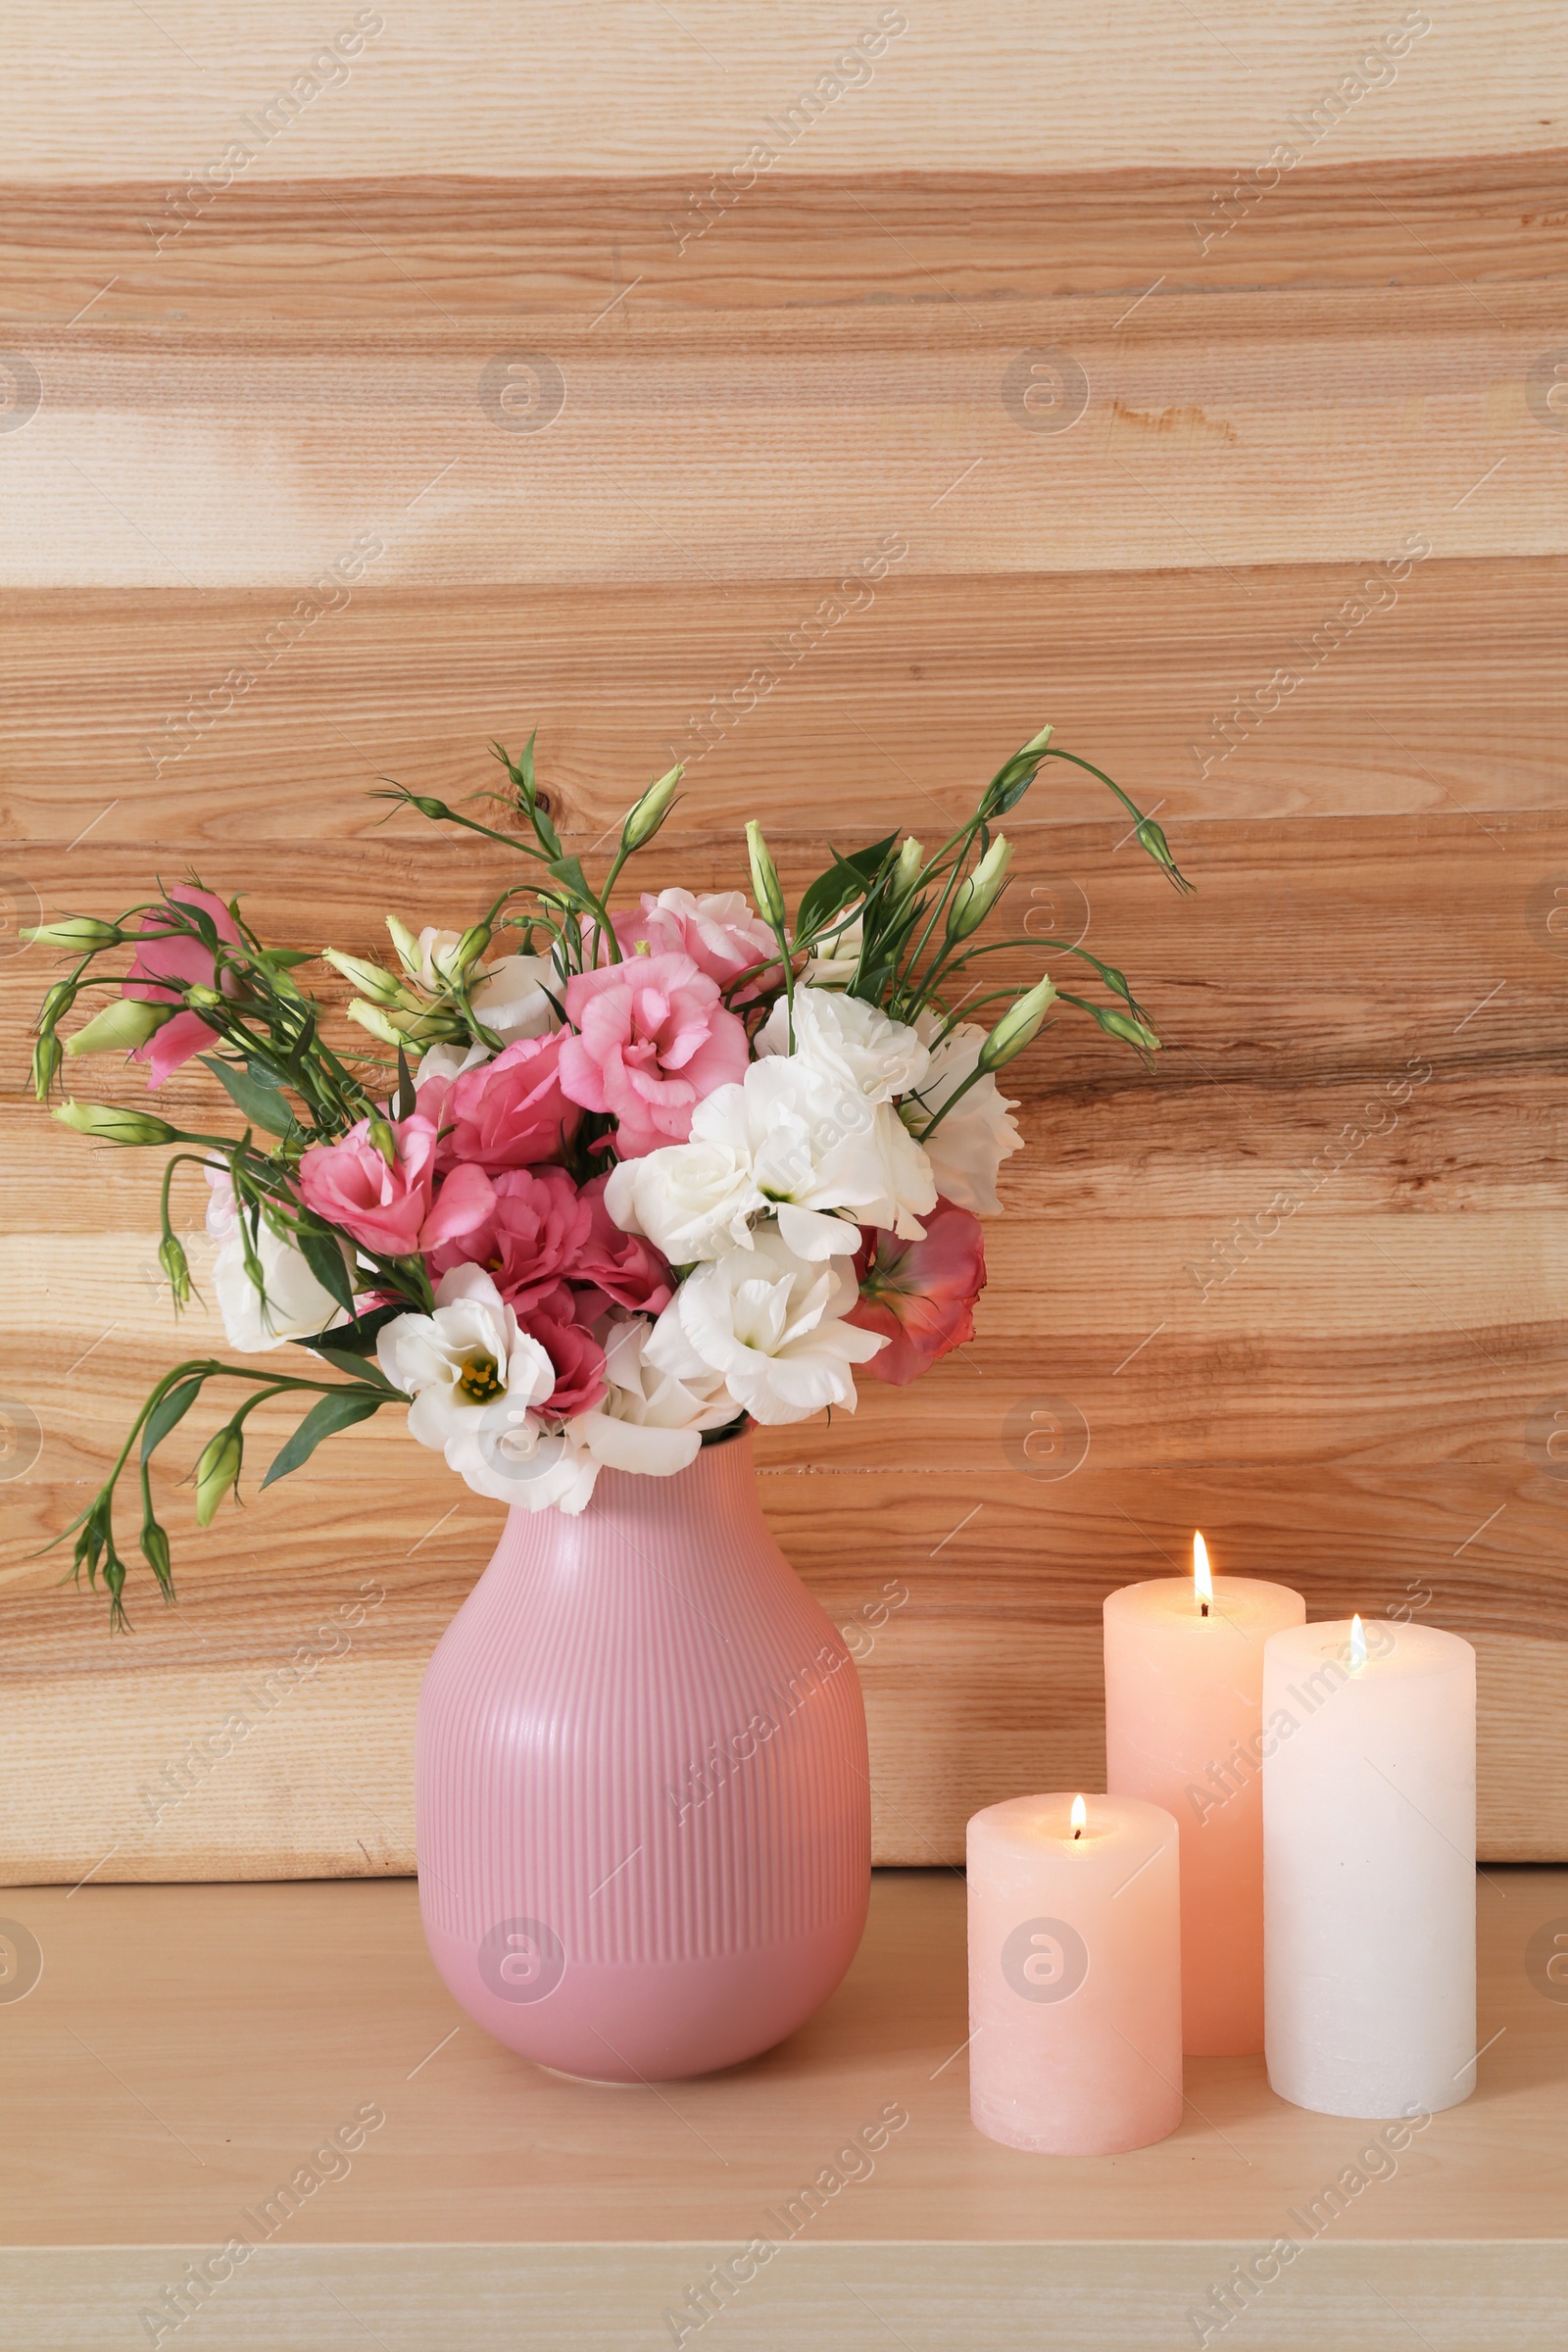 Photo of Burning candles and vase with flowers on table against wooden wall